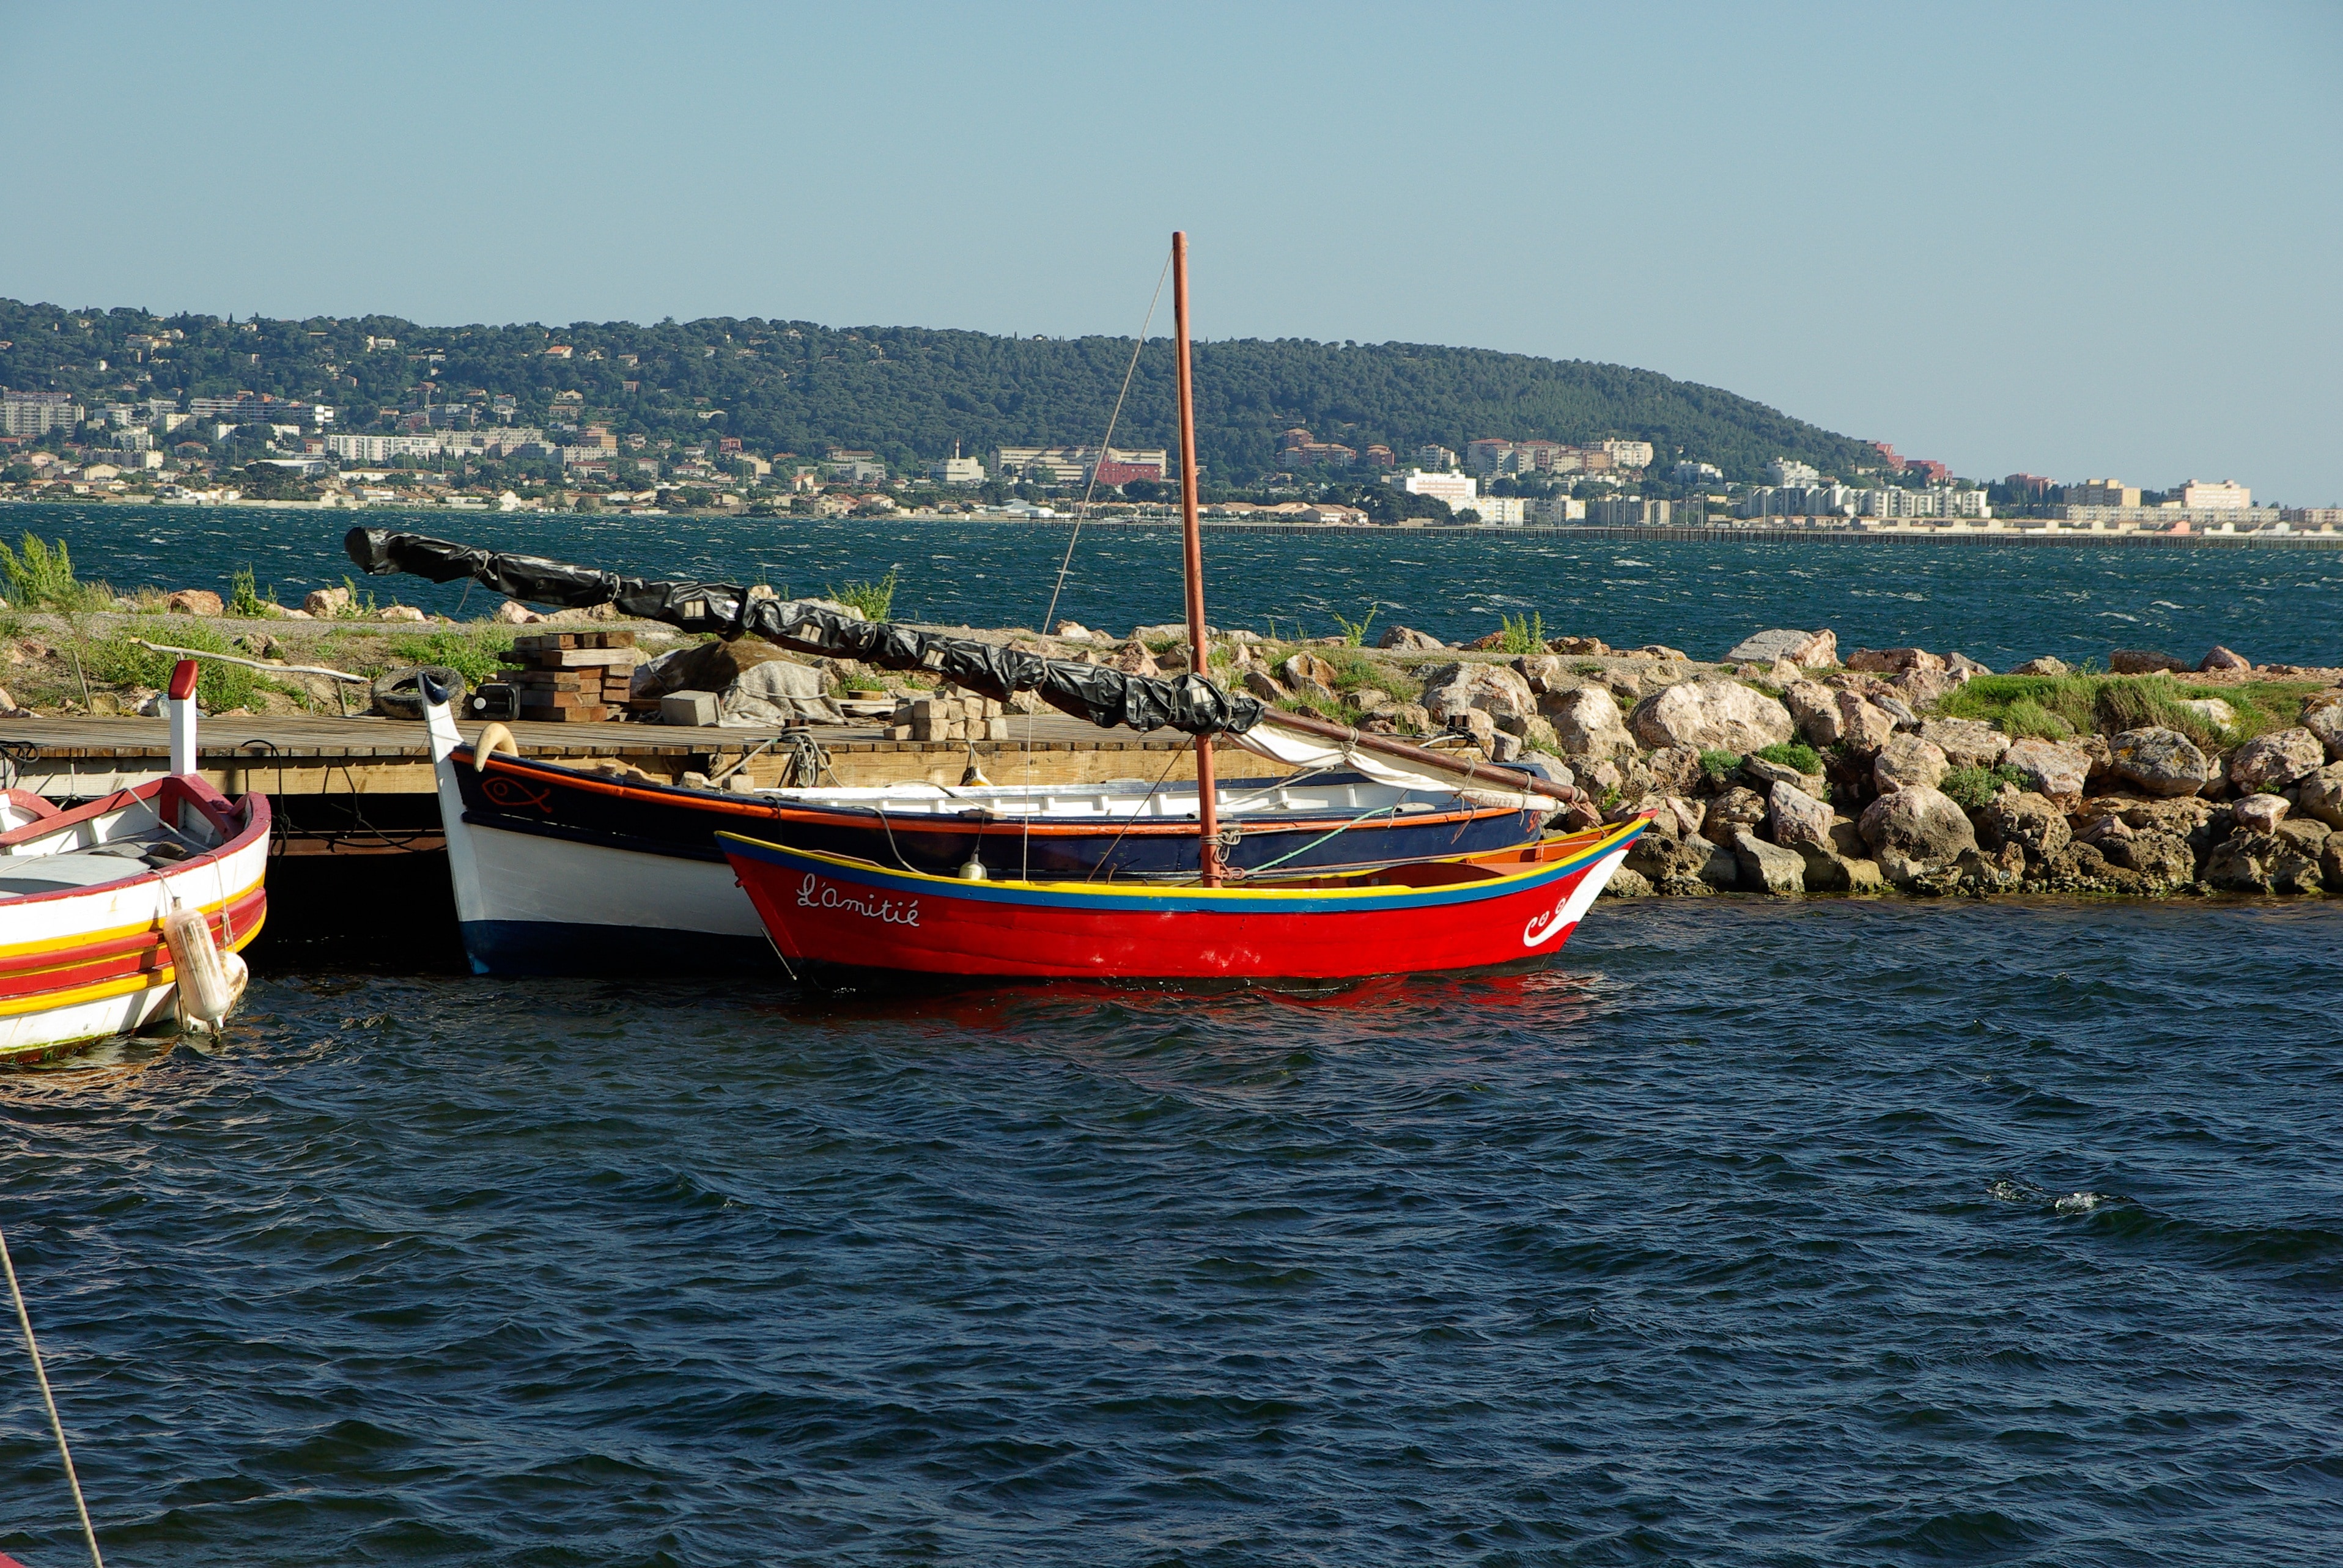 one red and one white boats on body of water along rocky shore under clear gray sky during daytime